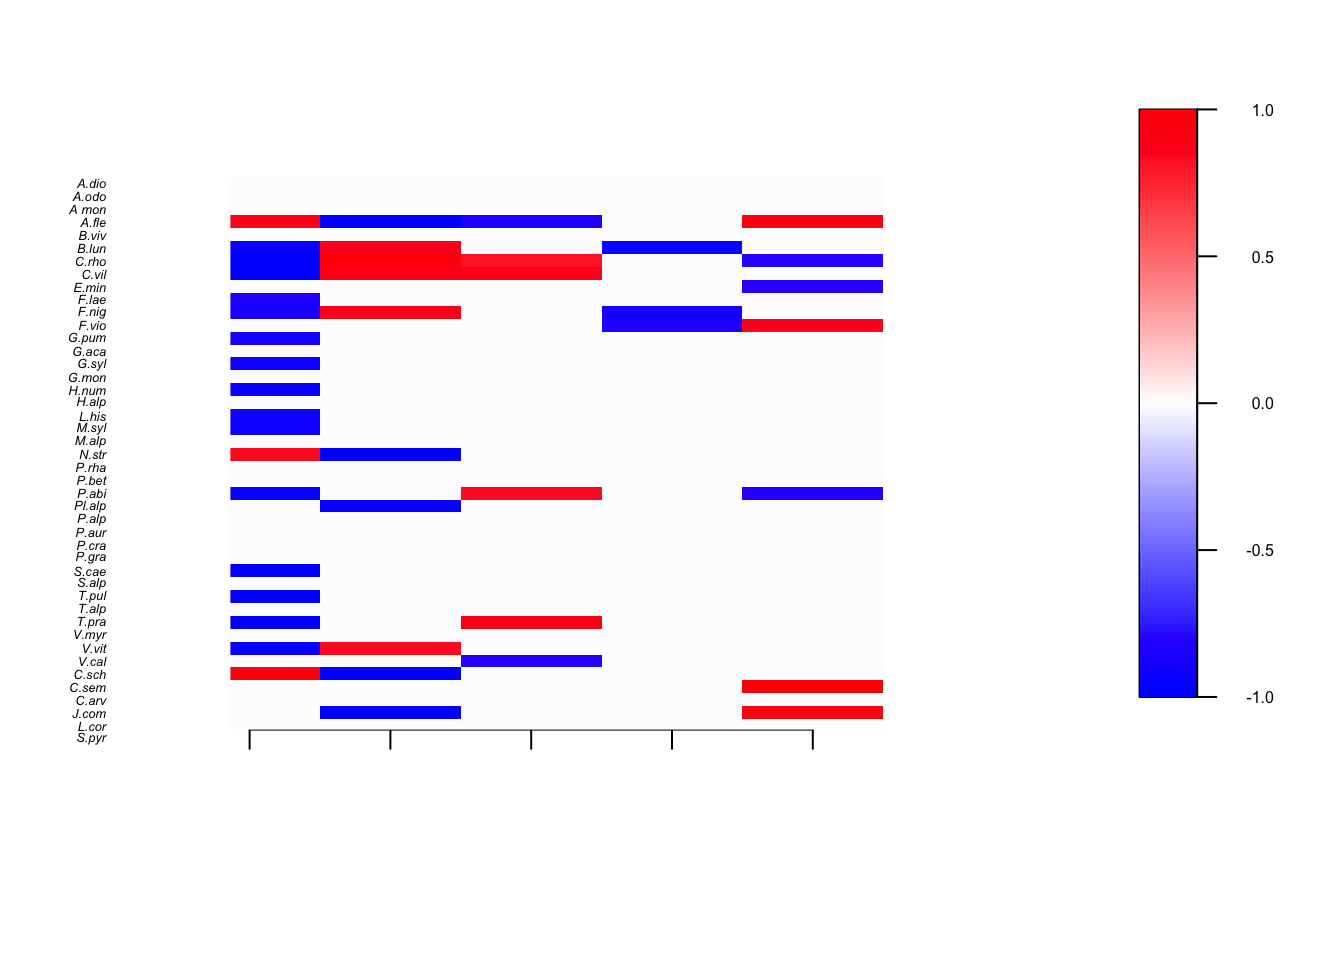 Posterior support values for species regression coefficients. Red if thebounds of the 90% credible interval are both positive, white if the credible interval overlaps 0 and blue if both bounds are negative